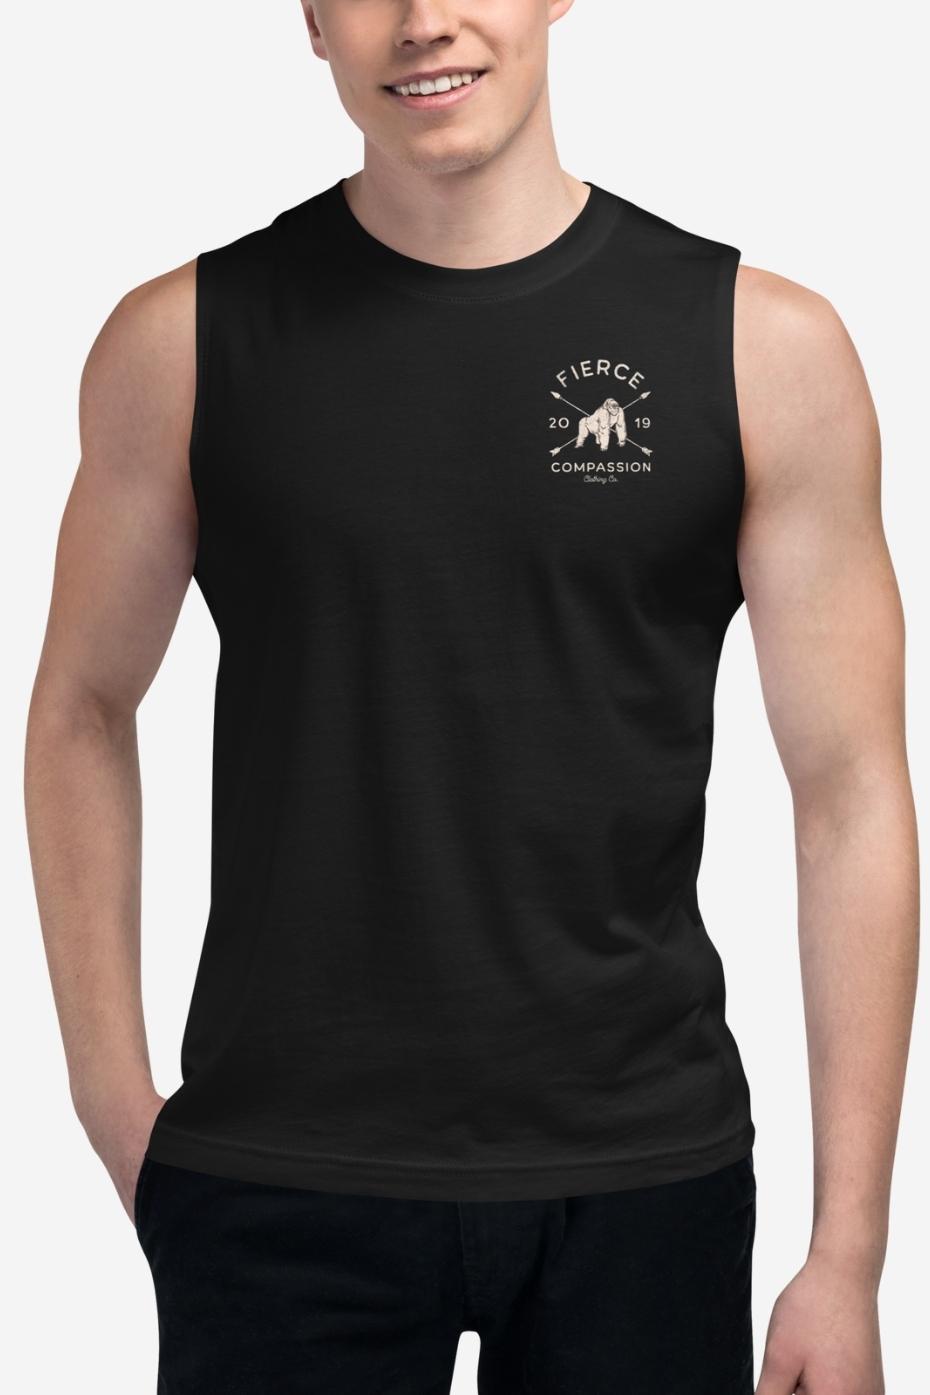 Plants Have Protein - Unisex Muscle Shirt